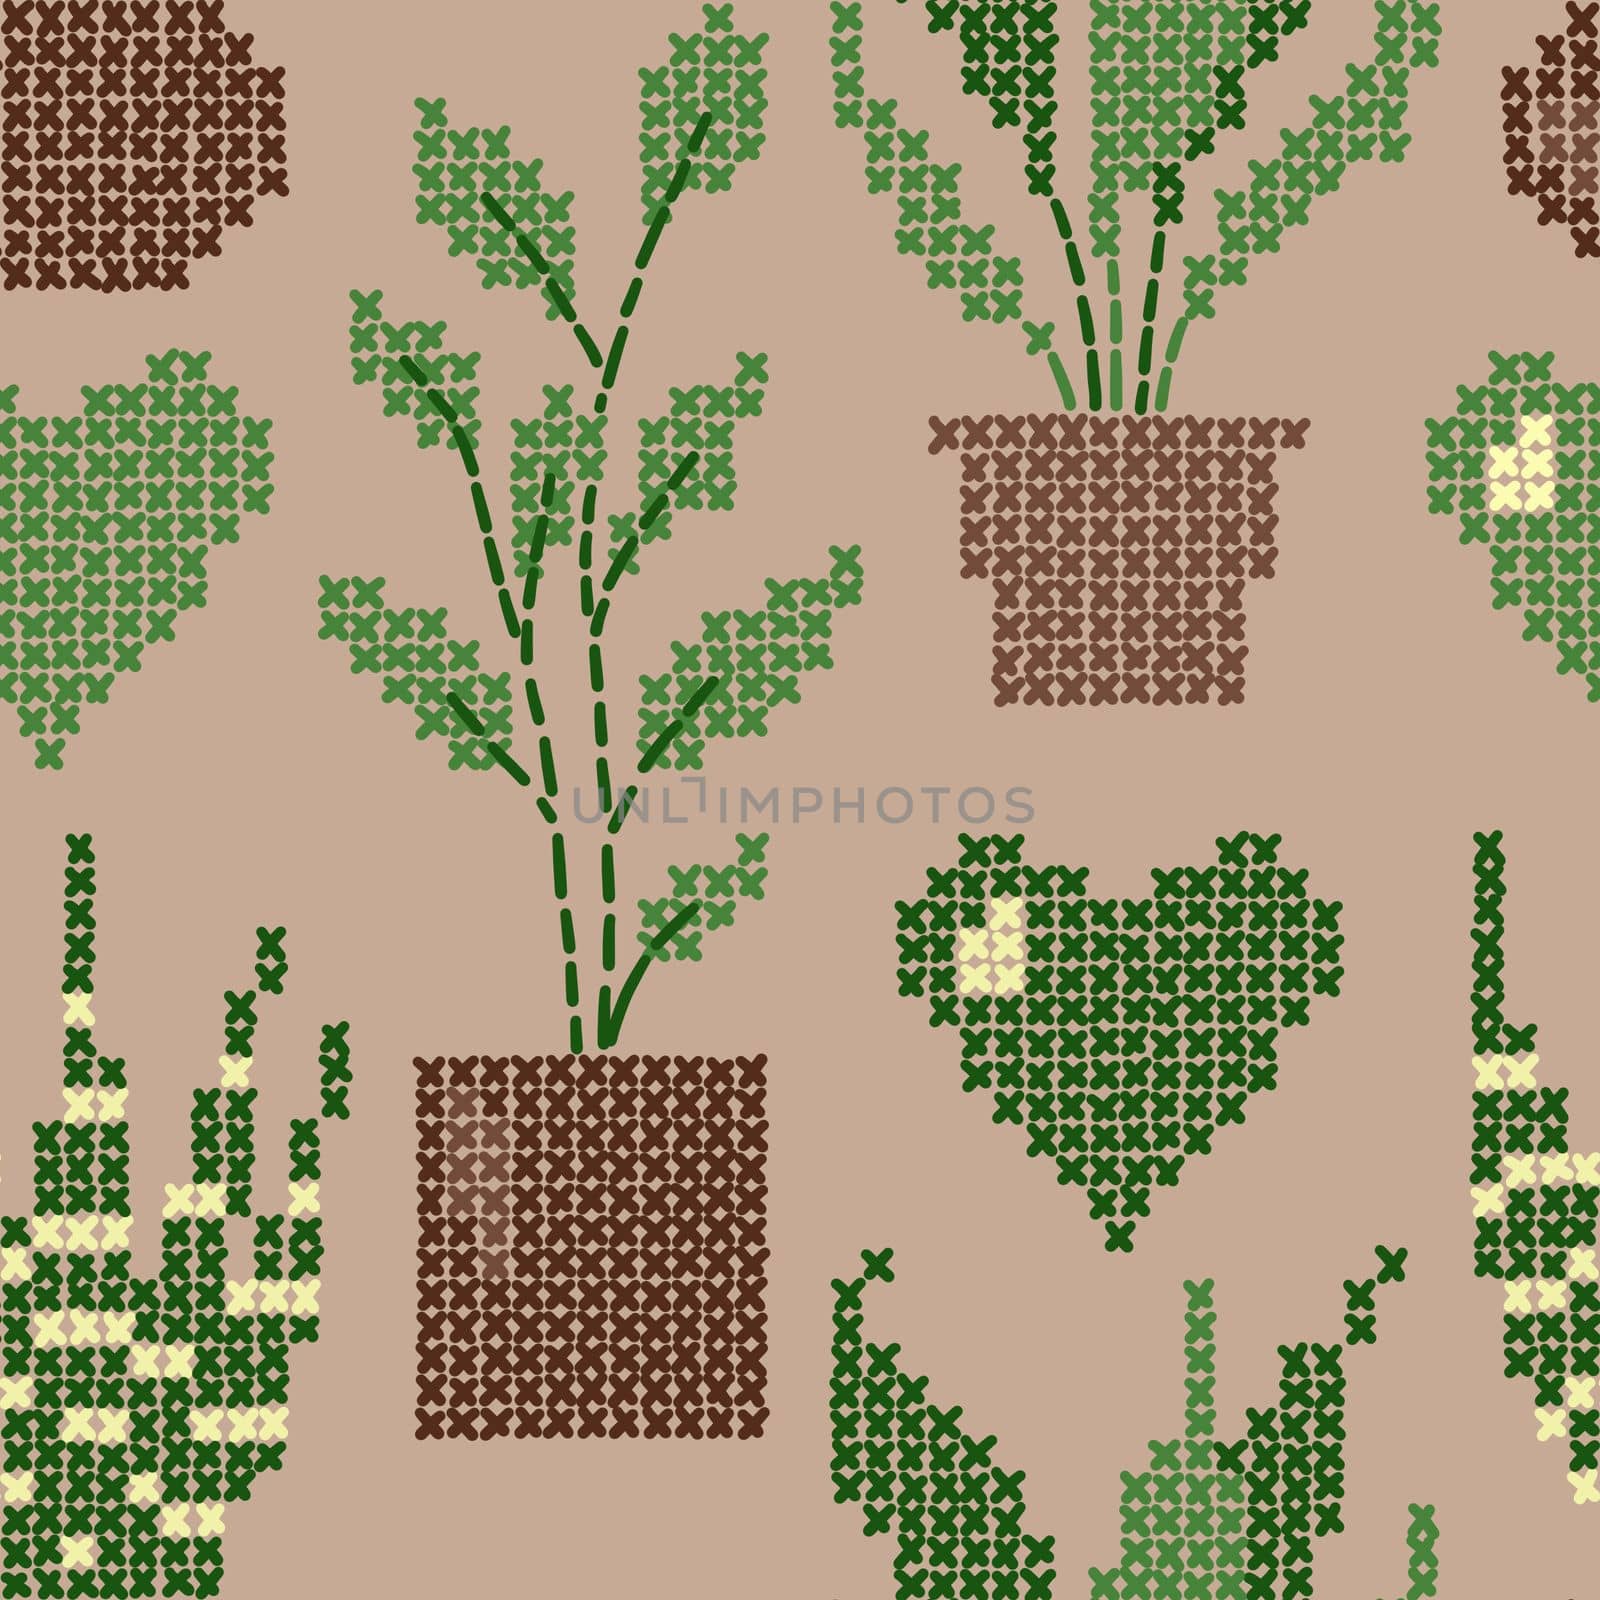 Hand drawn seamless pattern with cross stitch houseplants inpots, ficus snake plant peace lily. Cute crafts fabric print on beige background green leaves flowers indoor garden for plant lovers, urban jungle concept flower shop design, floral flora art. by Lagmar